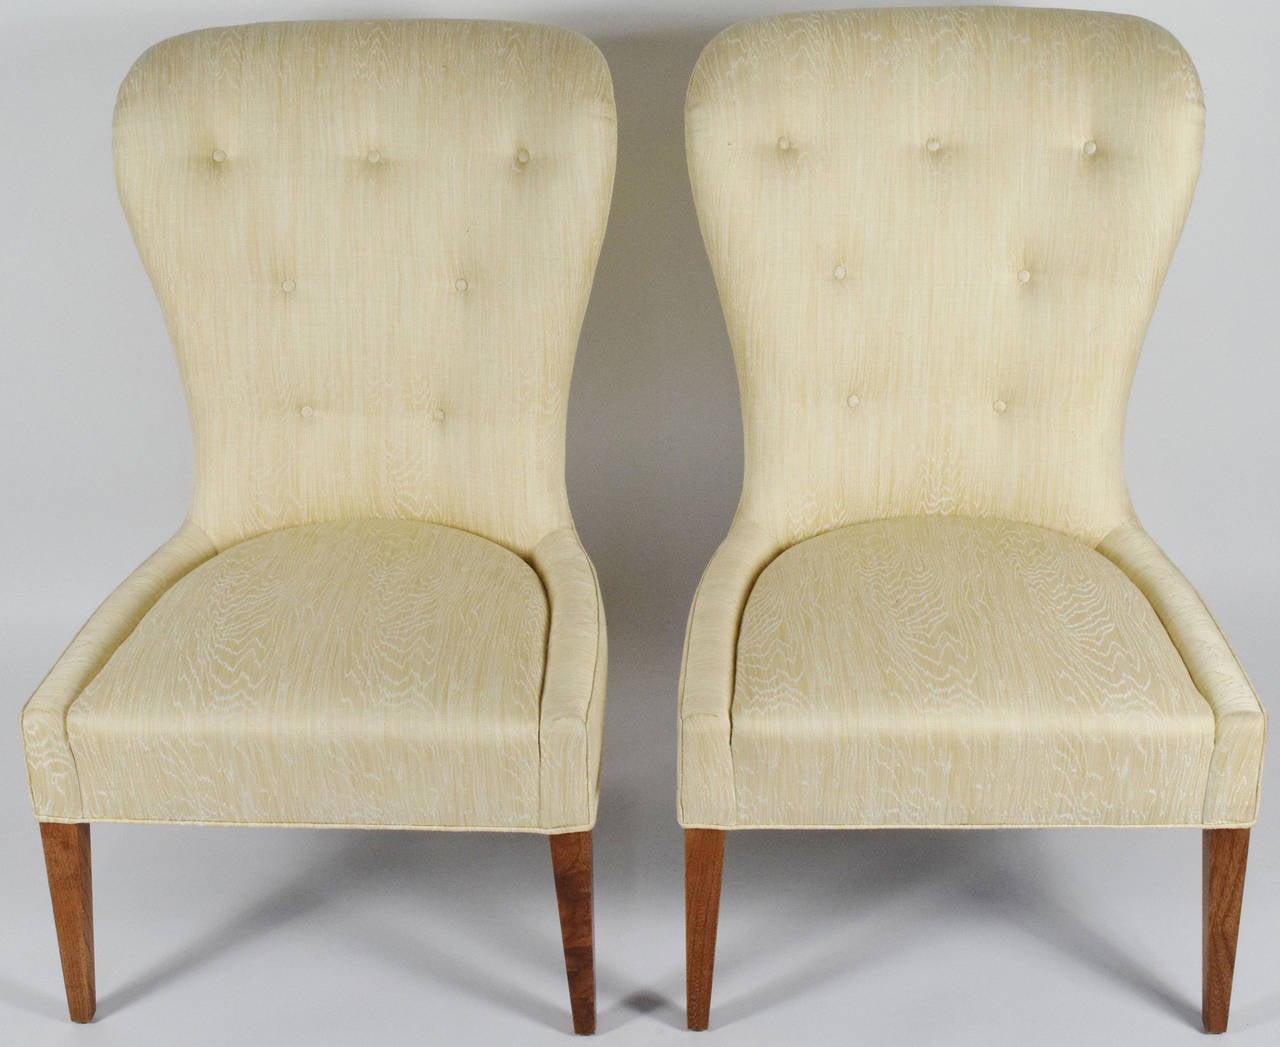 This is an elegant pair of chairs upholstered in a softly patterned silk and linen.  Very clean lined and simple, fits in any environment. 